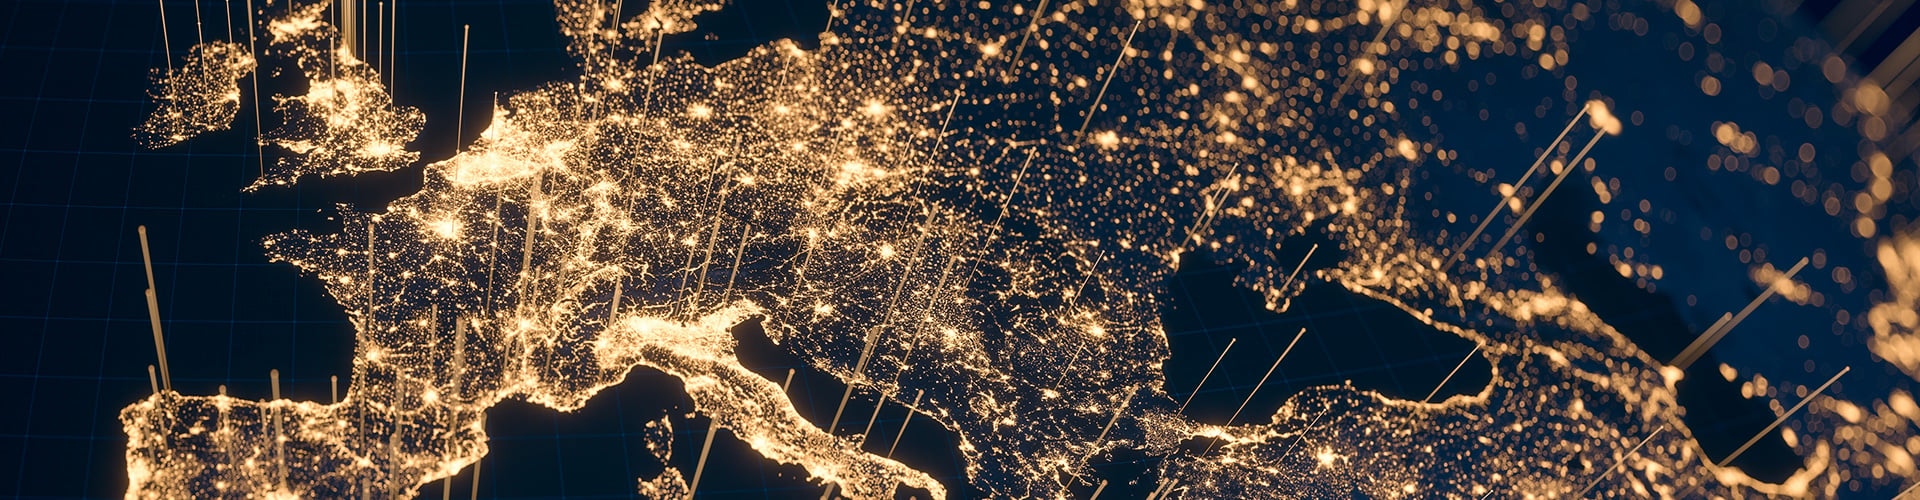 Continent view of Europe lit up